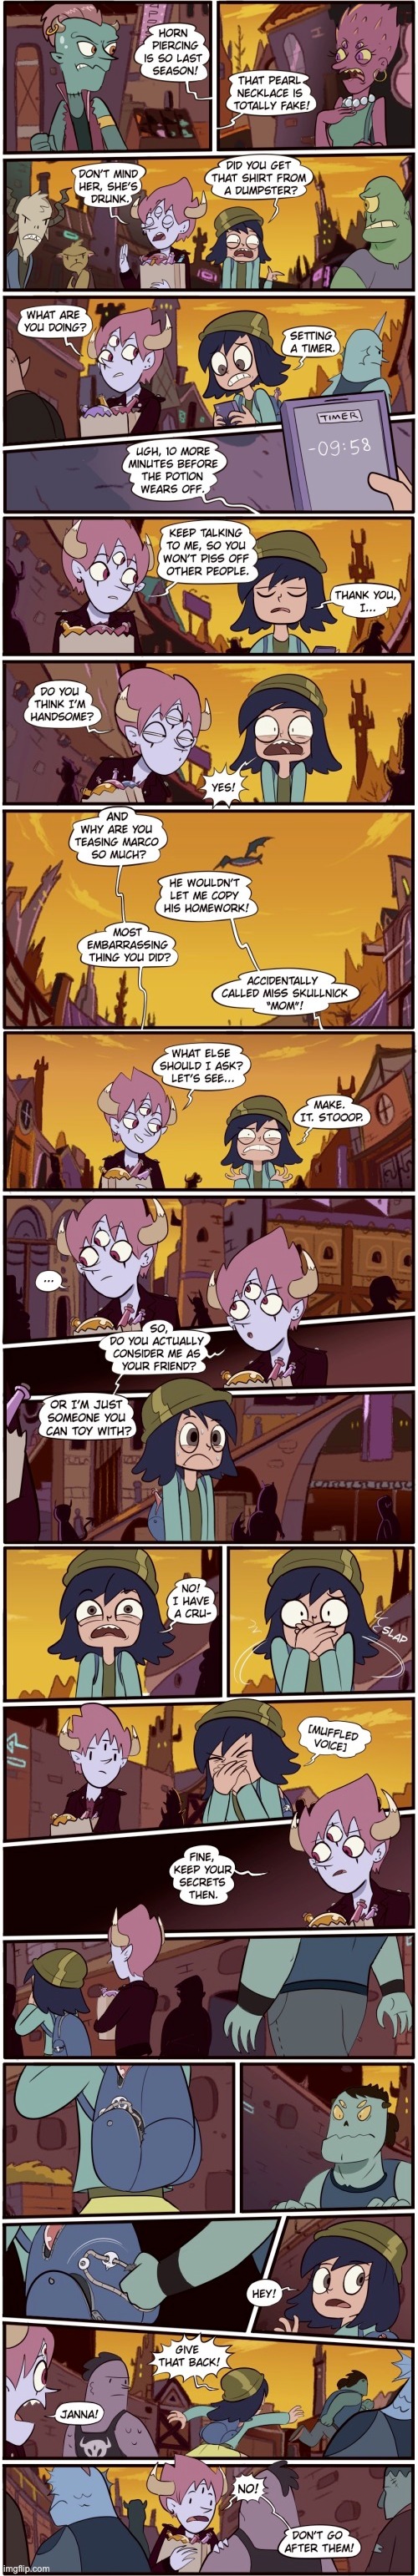 Tom vs Jannanigans: Are We There Yet? (Part 3) | image tagged in morningmark,comics/cartoons,svtfoe,star vs the forces of evil,comics,memes | made w/ Imgflip meme maker